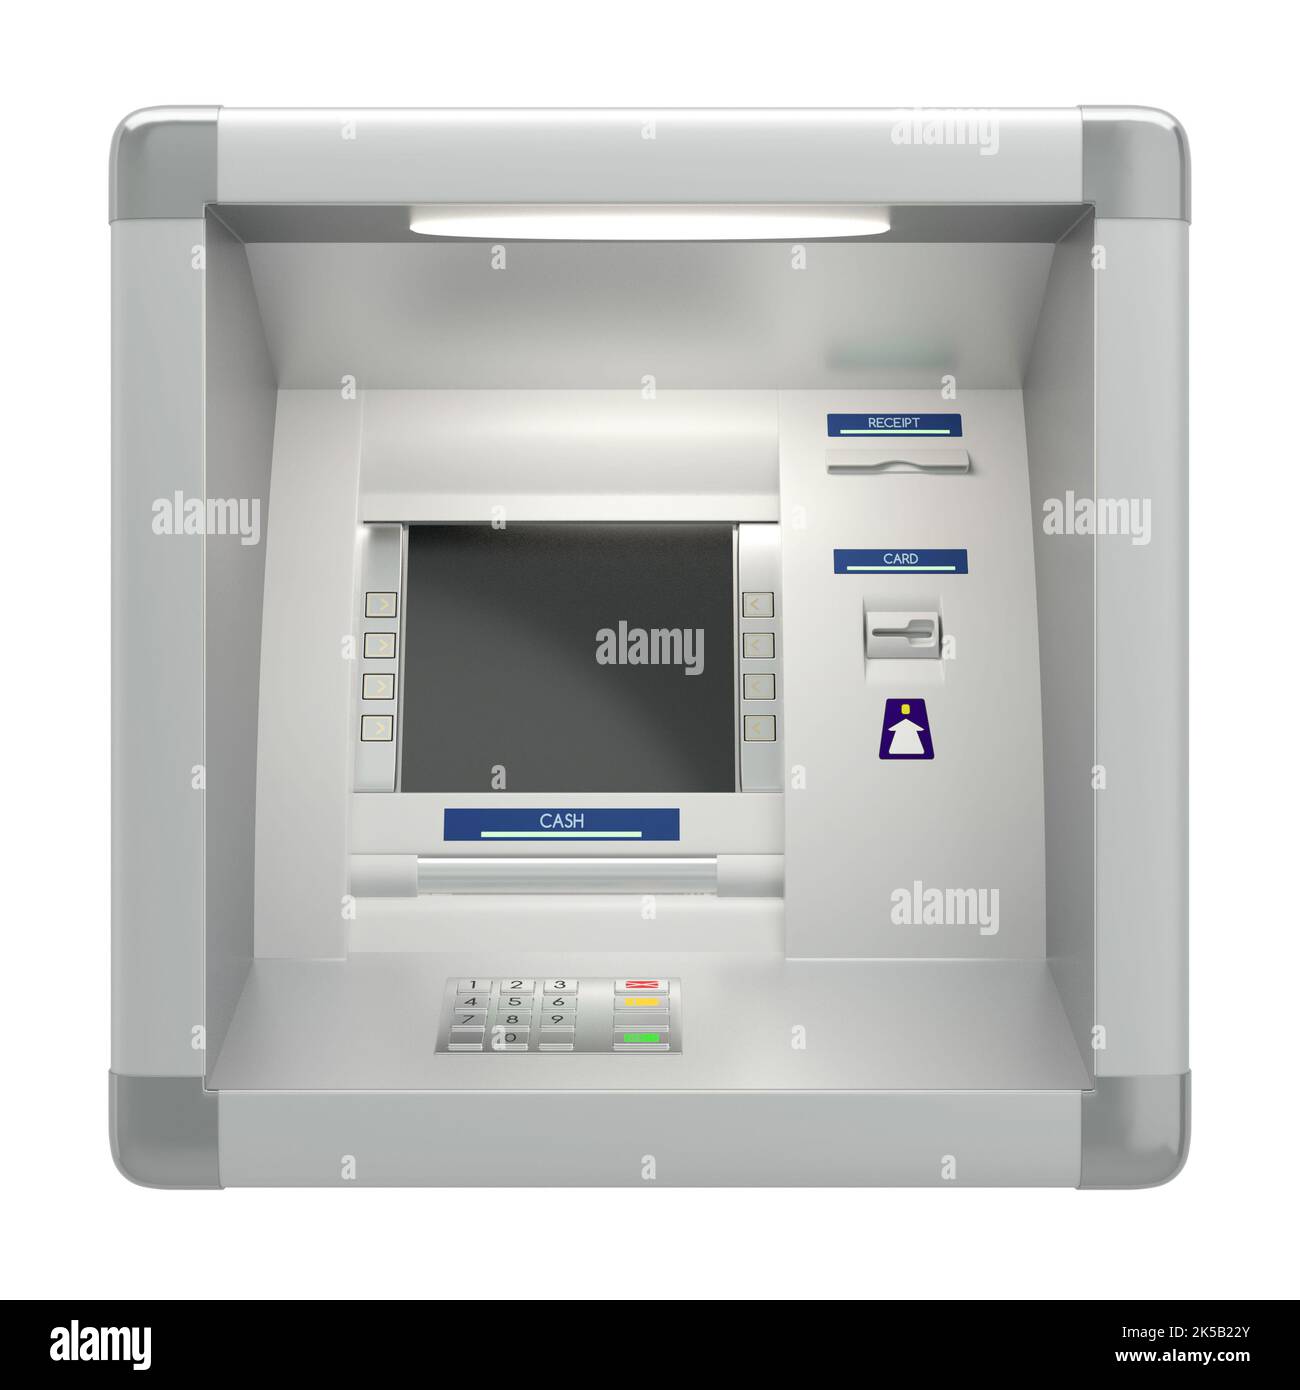 Atm machine with a card reader. Pin code safety, automatic banking, bank account access electronic cash withdrawal, concept. Display screen, buttons, Stock Photo